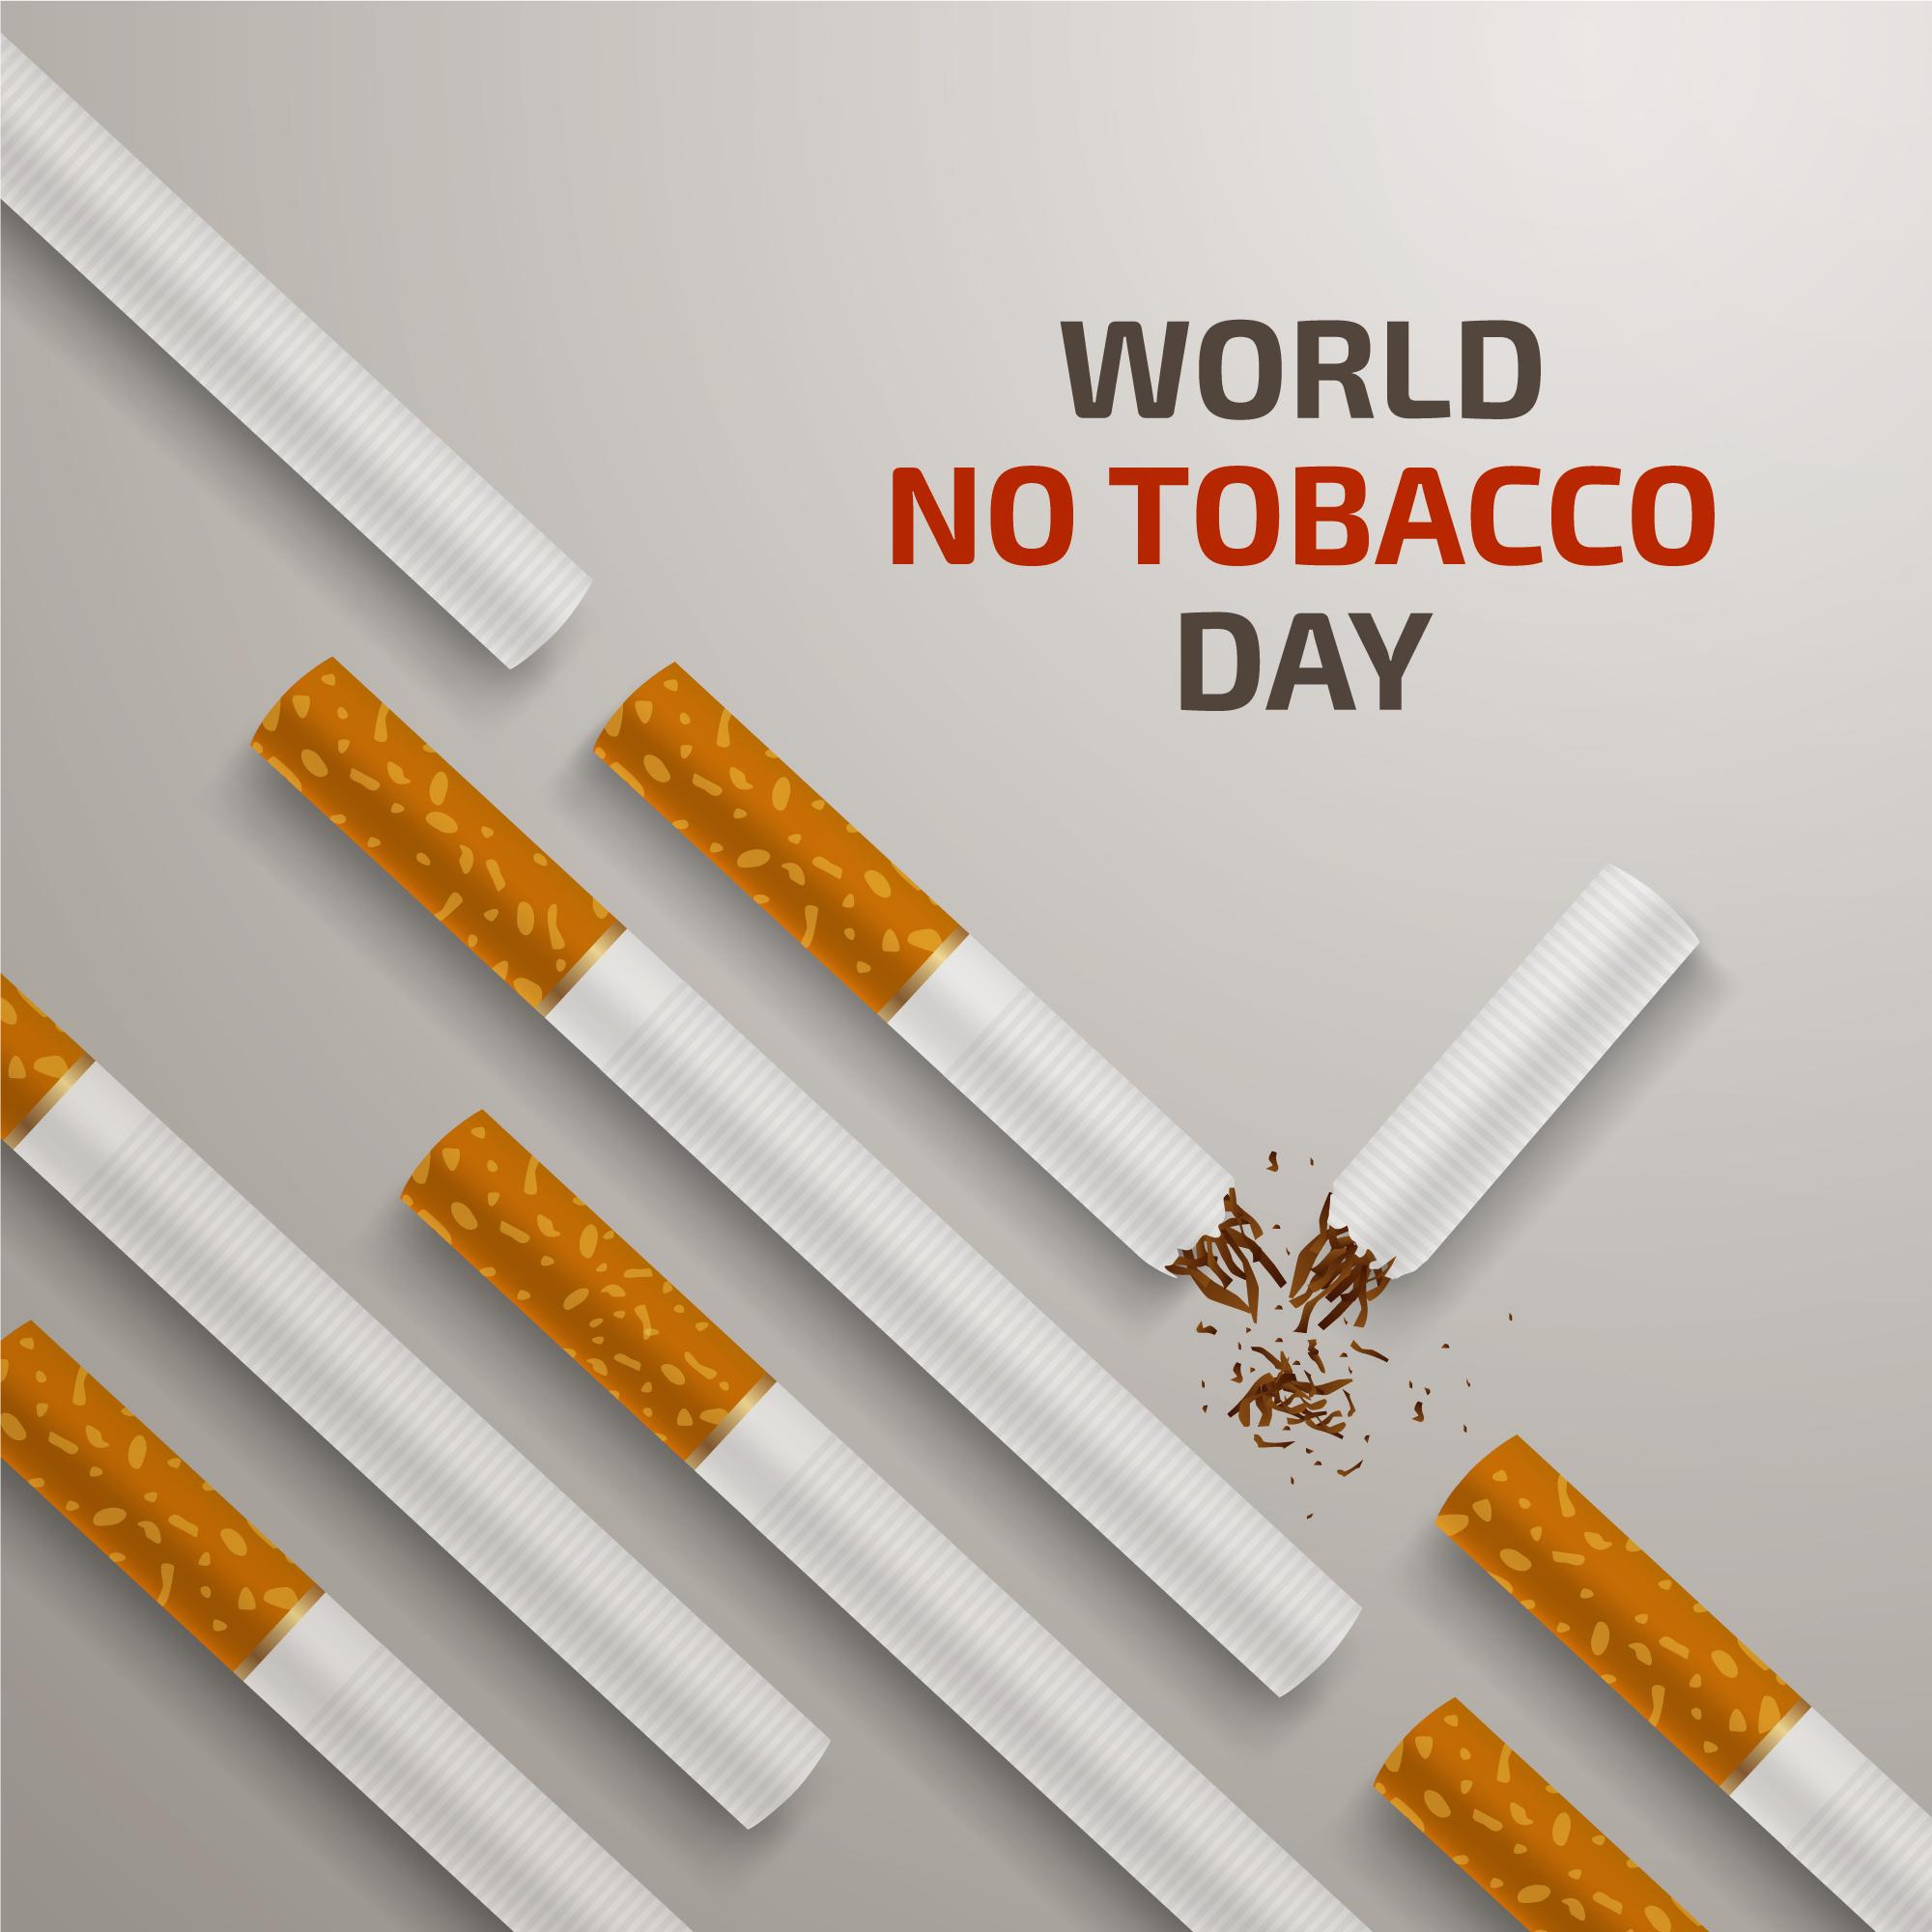 We need food, not tobacco: World no tobacco day observed on 31st May 2023